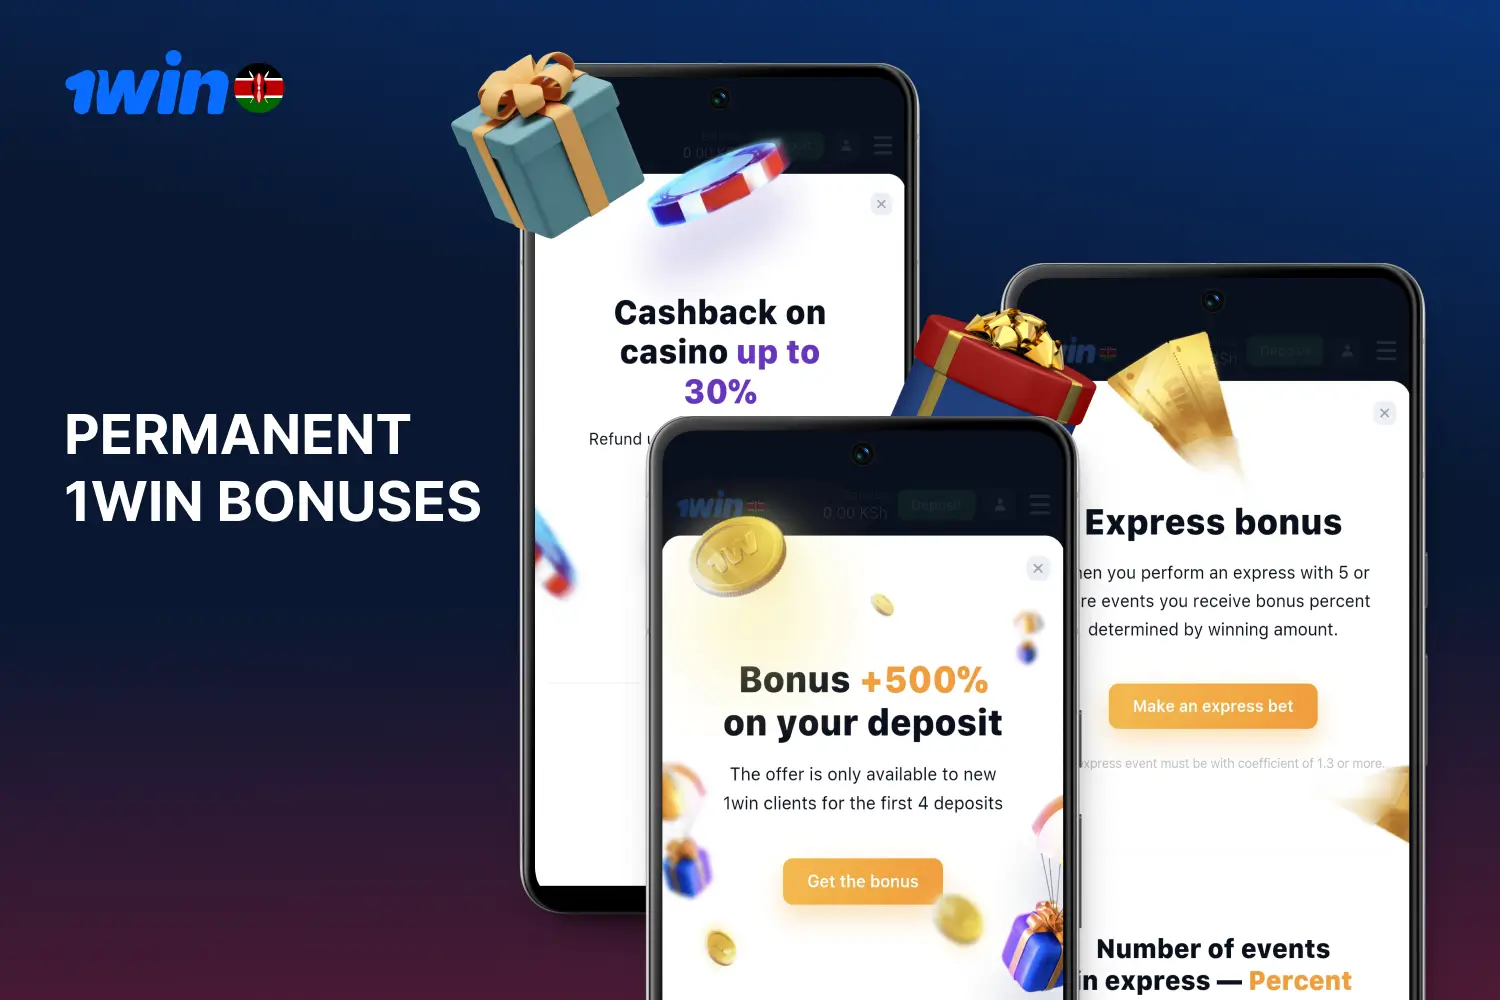 Several permanent bonuses are offered by 1win to its users in Kenya